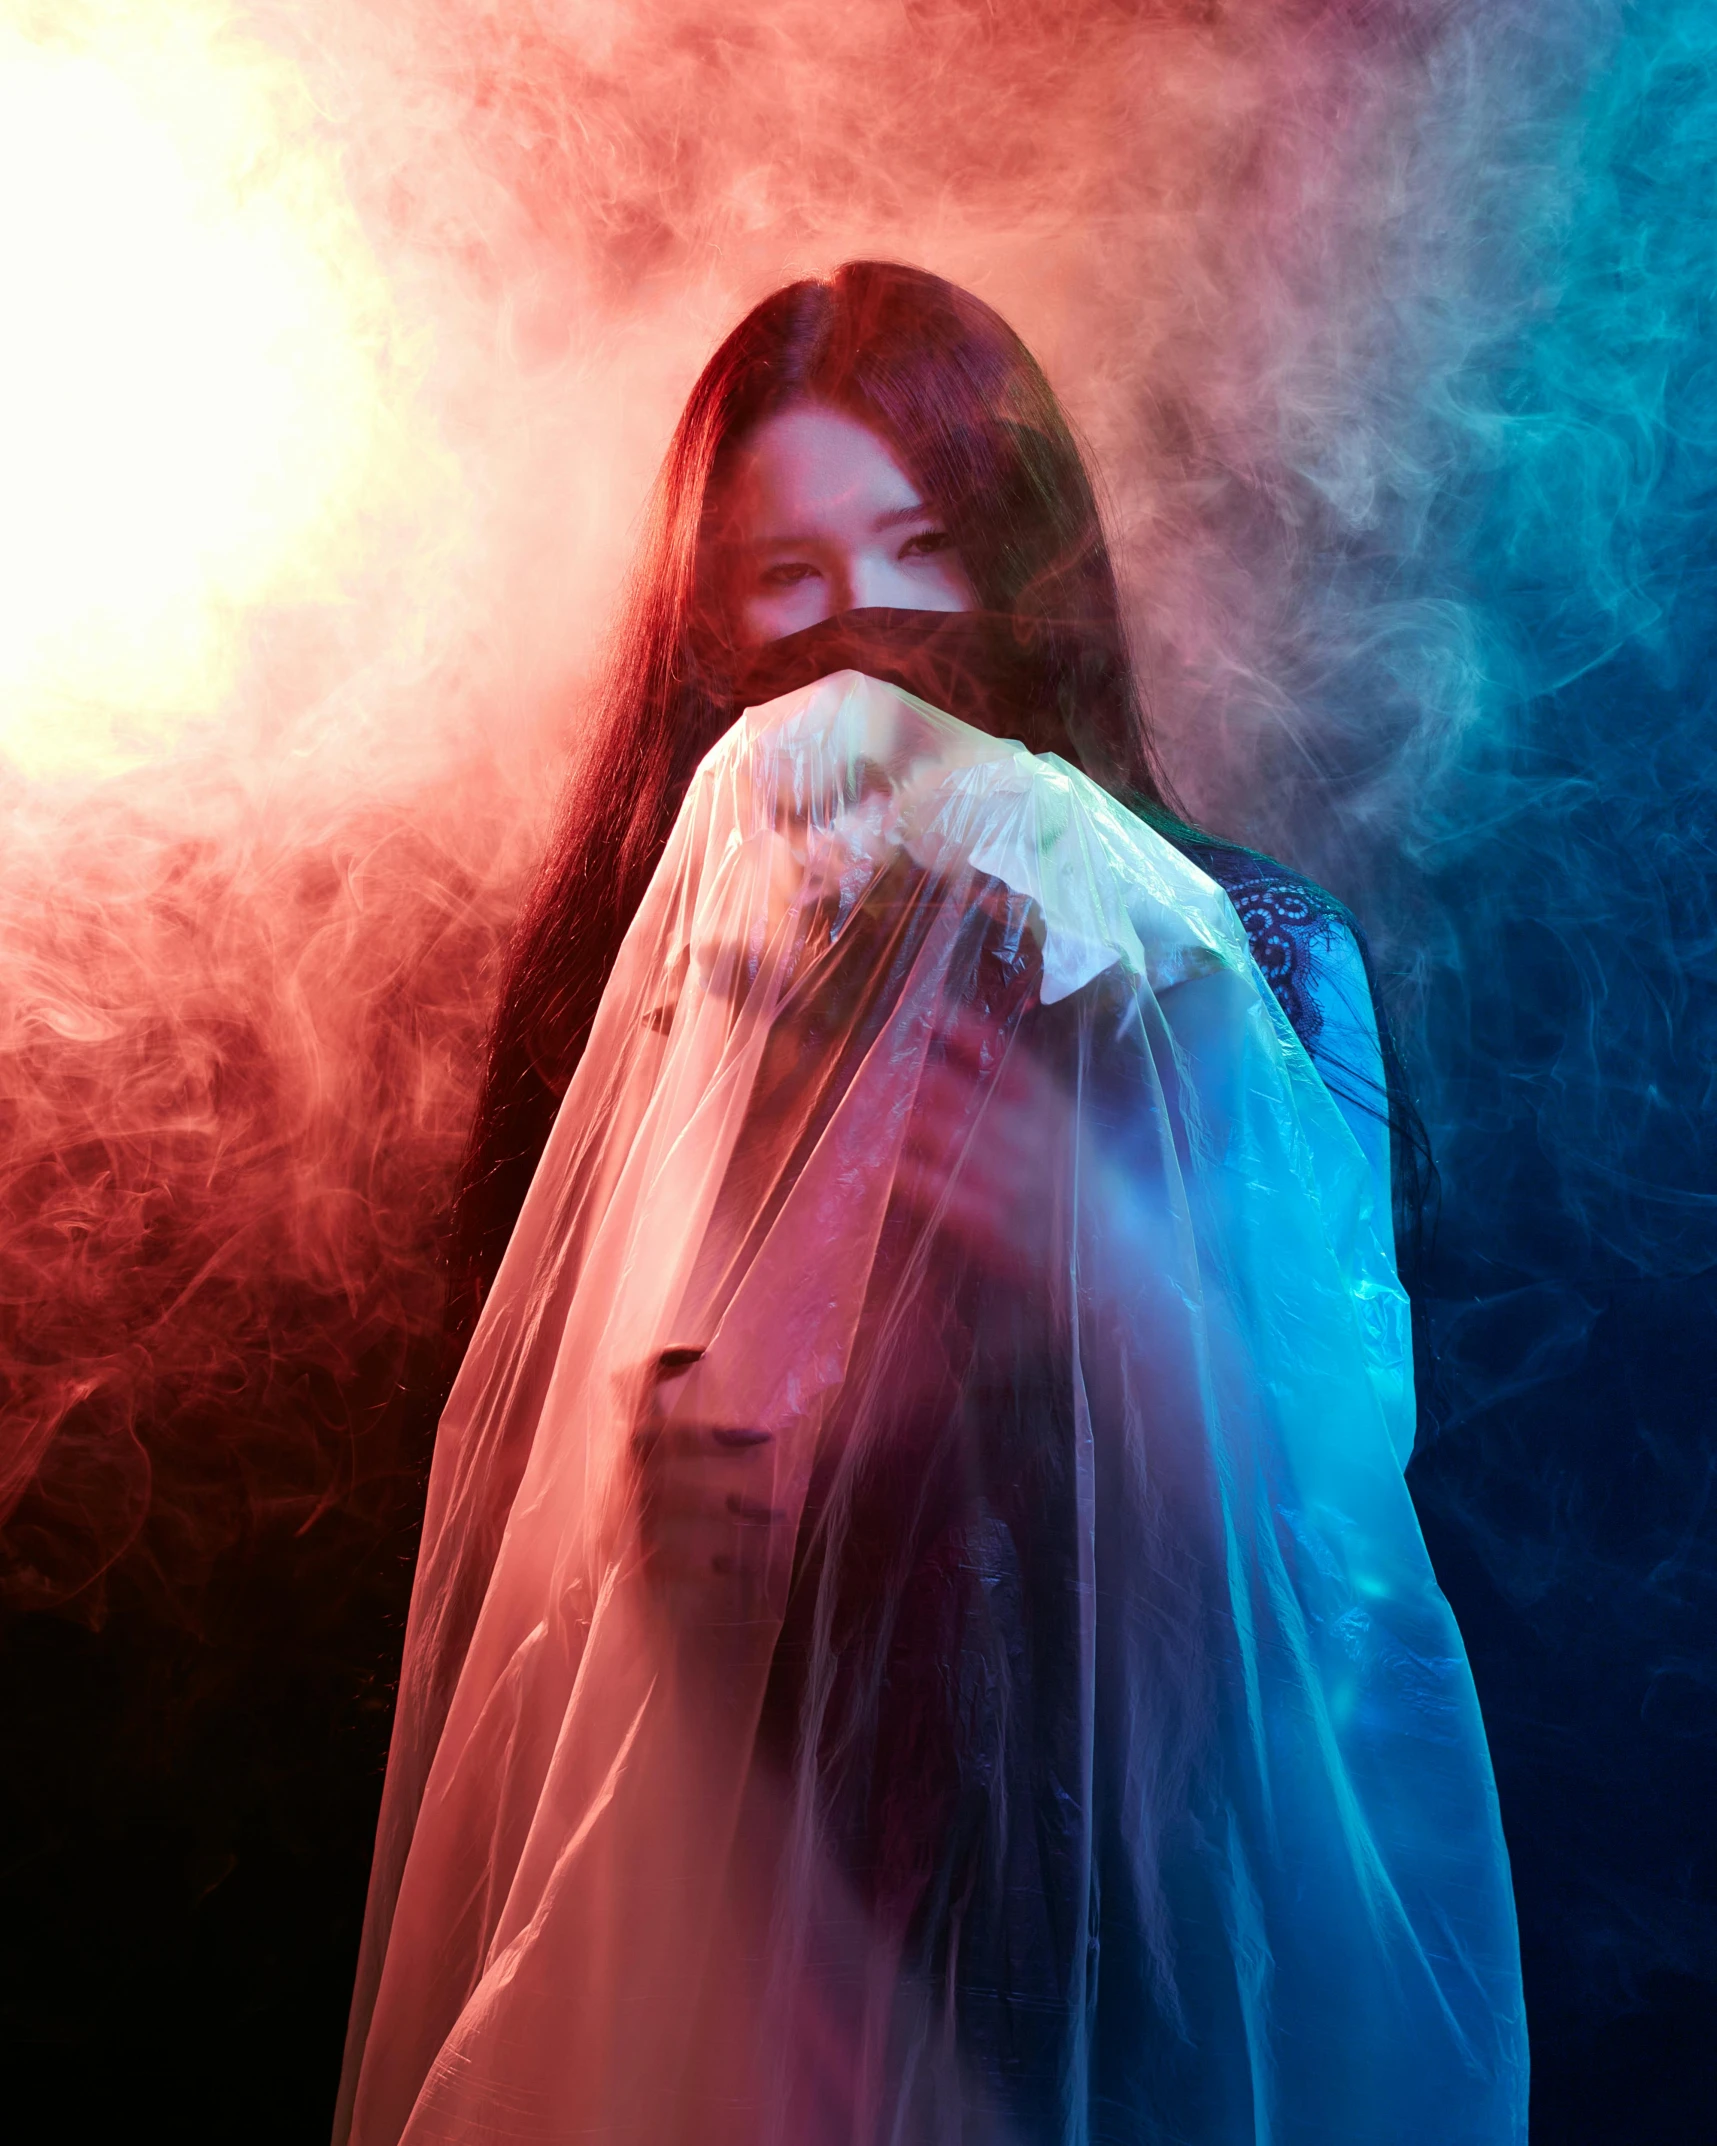 a woman standing in a smoke filled room, an album cover, inspired by Elsa Bleda, pexels contest winner, iu lee ji-eun as a super villain, diaphanous iridescent silks, woman holding another woman, red and blue back light